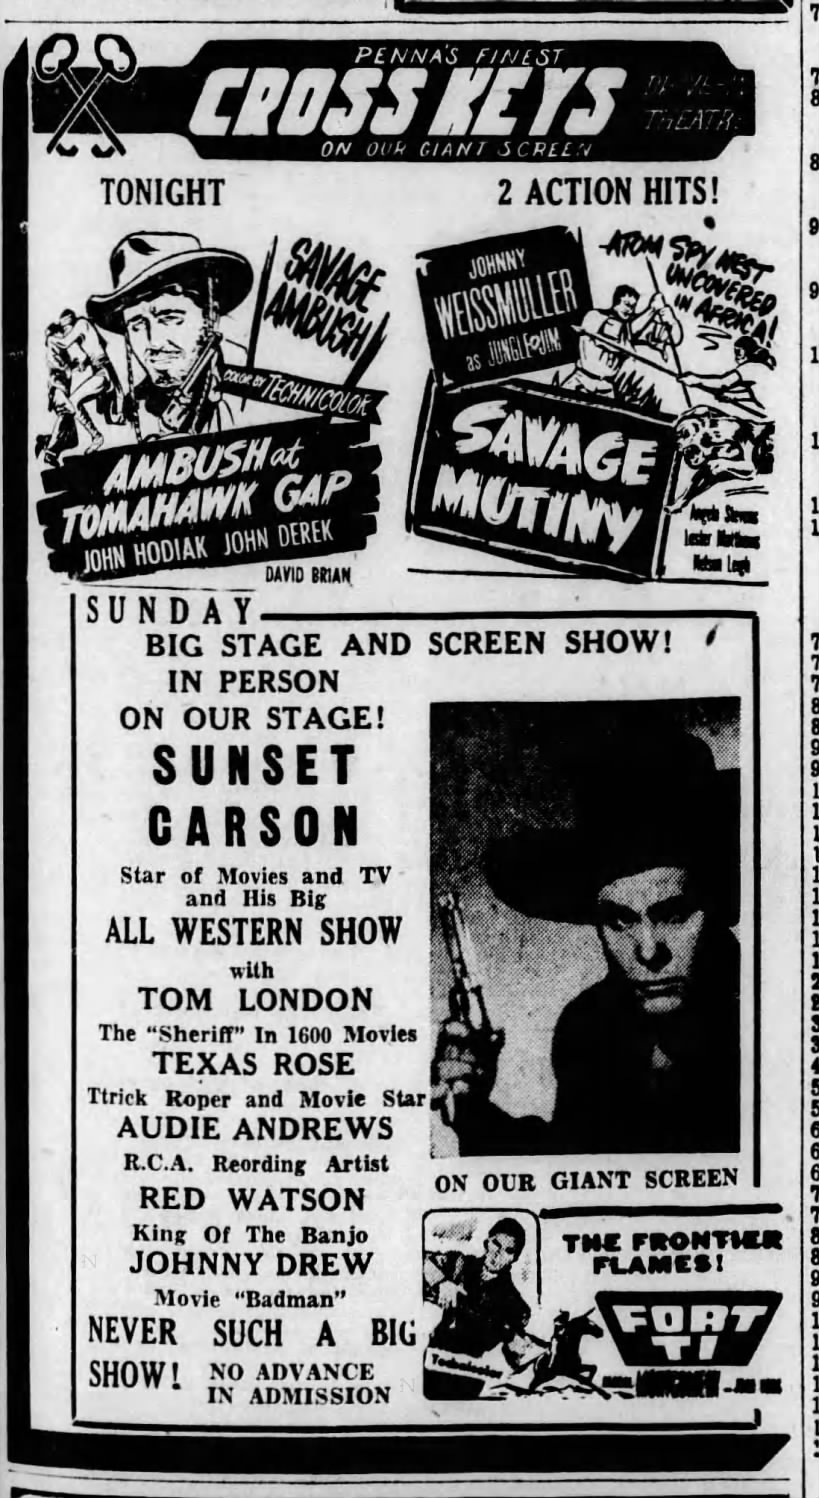 Movie cowboy Tom London on 1954 personal appearance tour with Sunset Carson.